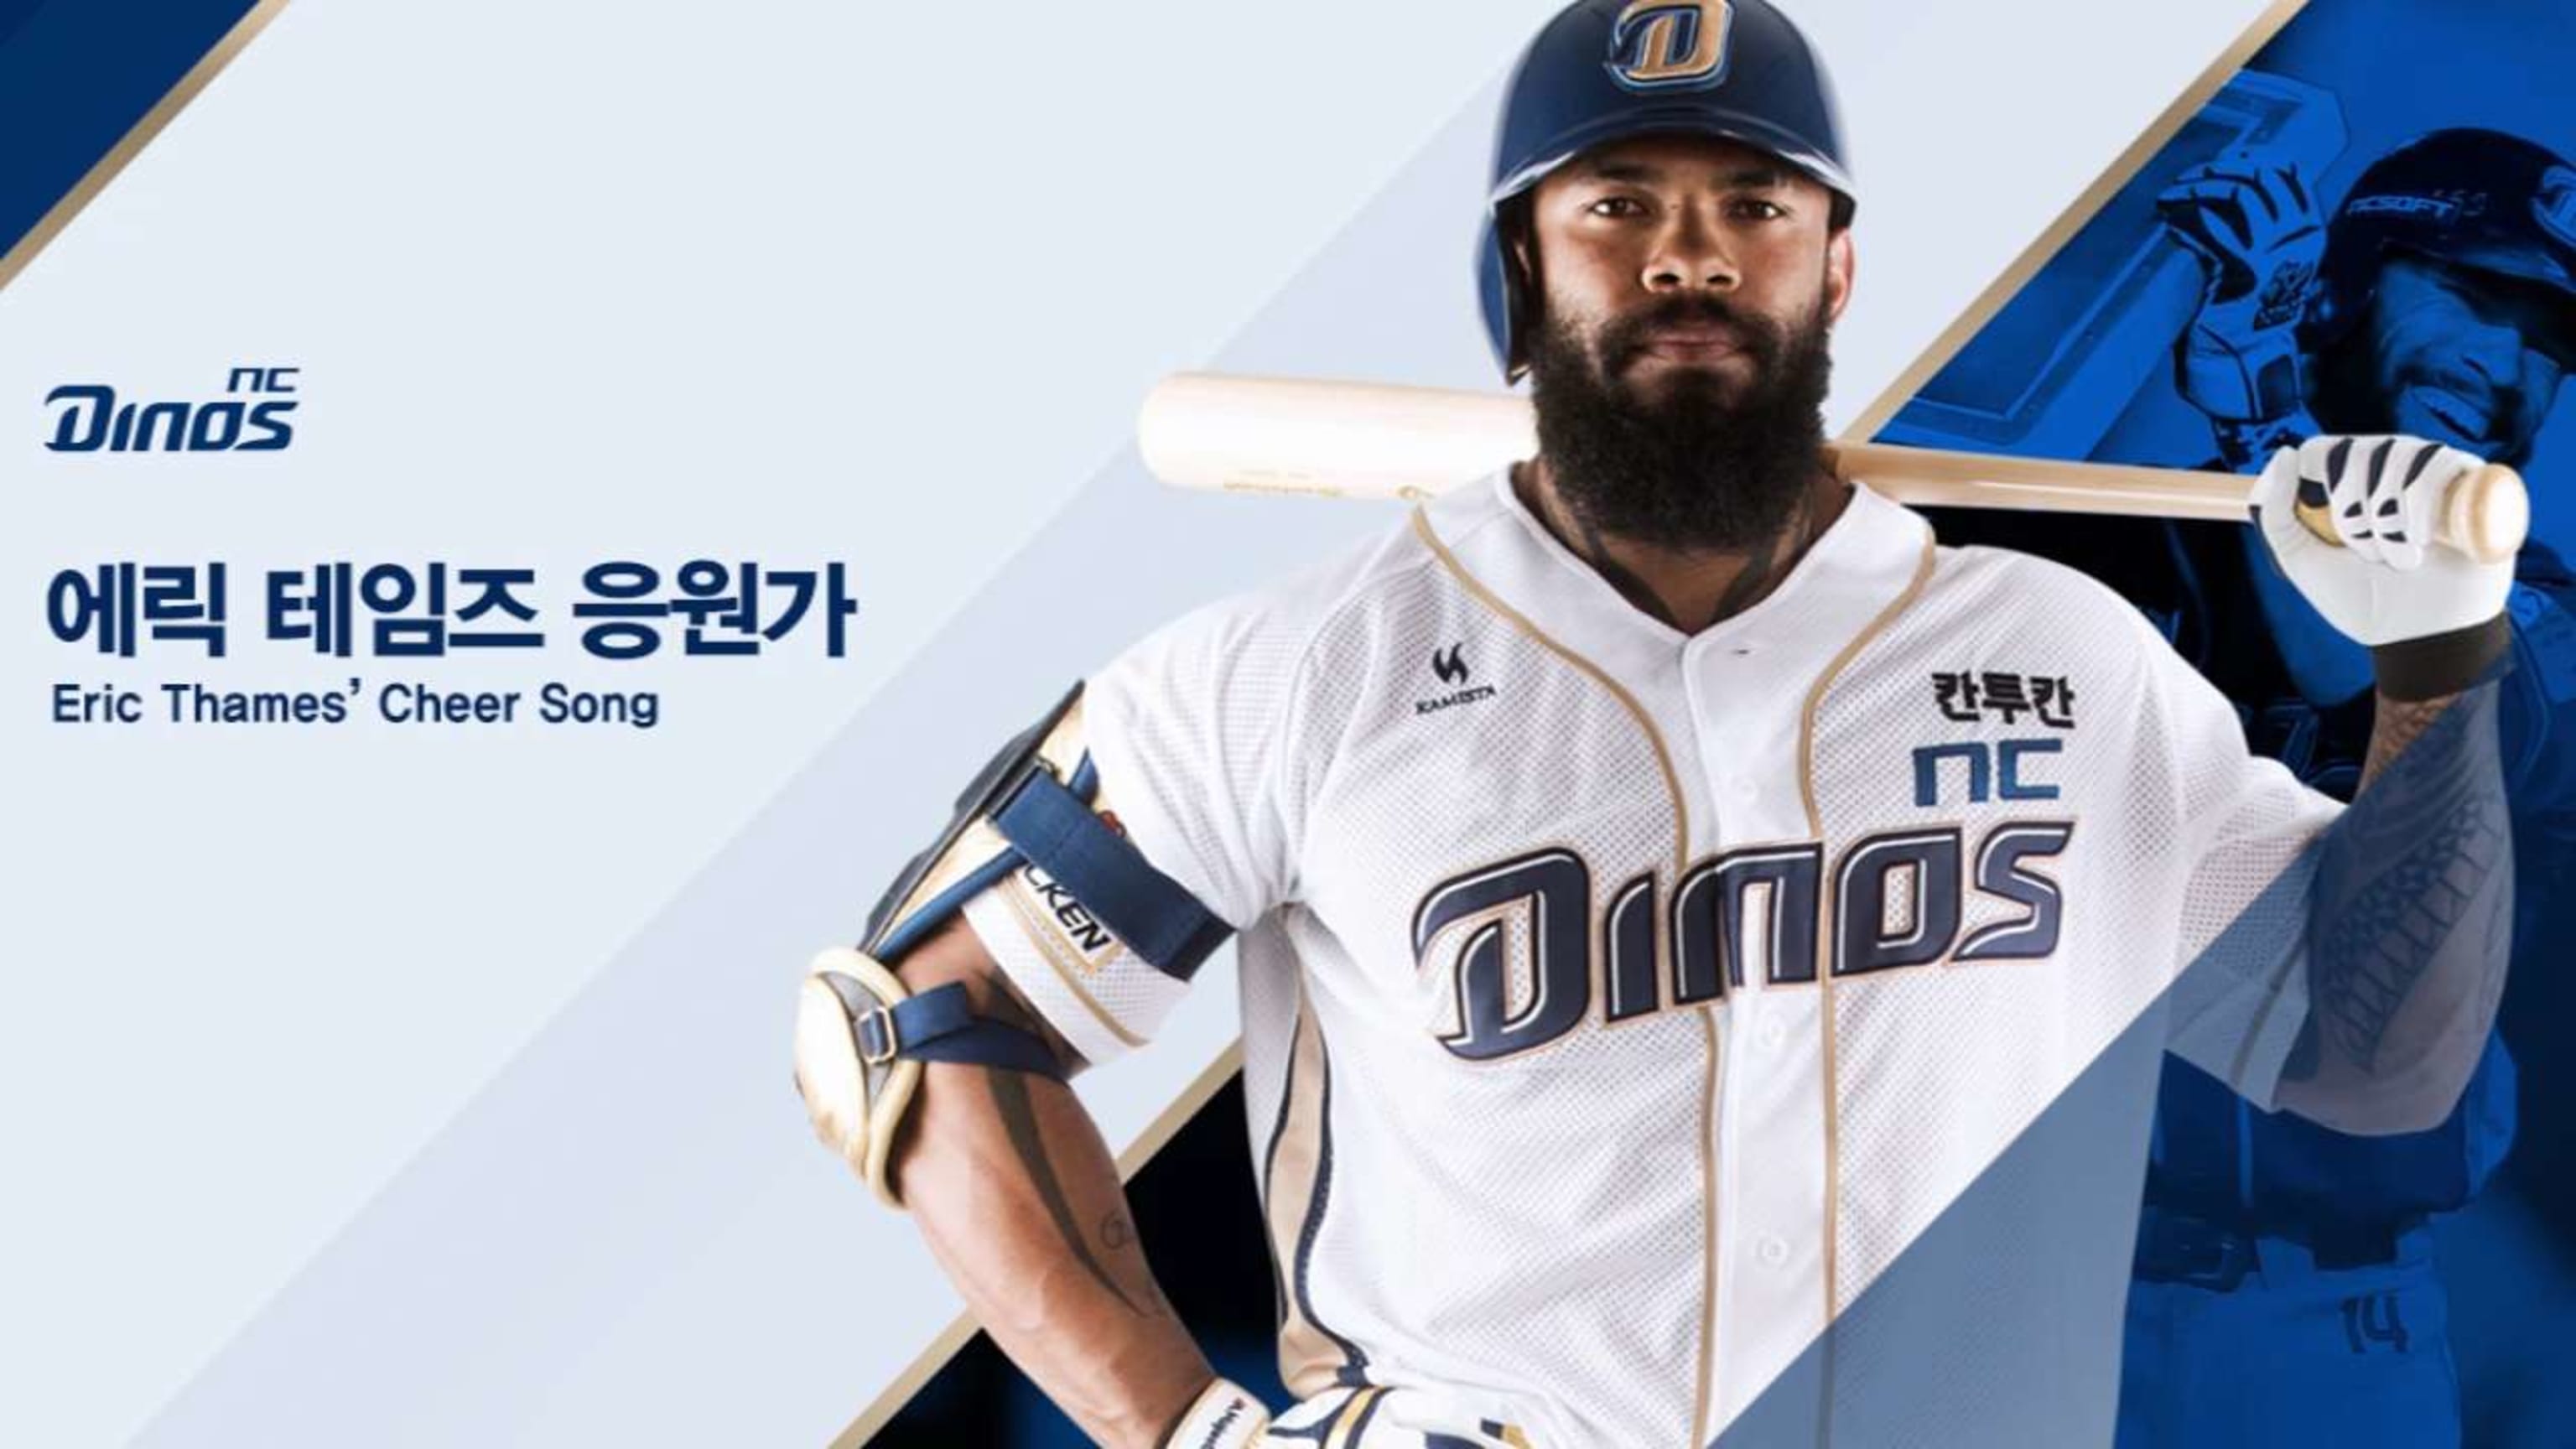 Good luck getting Eric Thames' cheer song from Korea out of your head